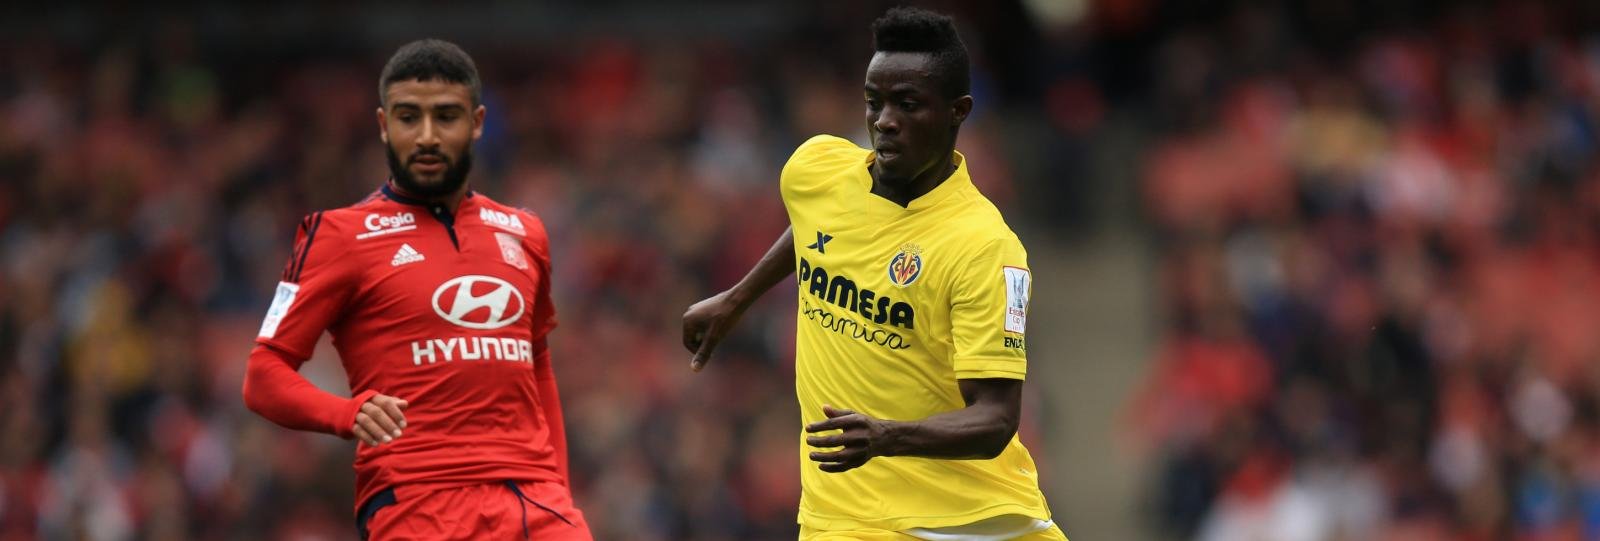 Manchester United enter talks with £30m Manchester City target and Villarreal star